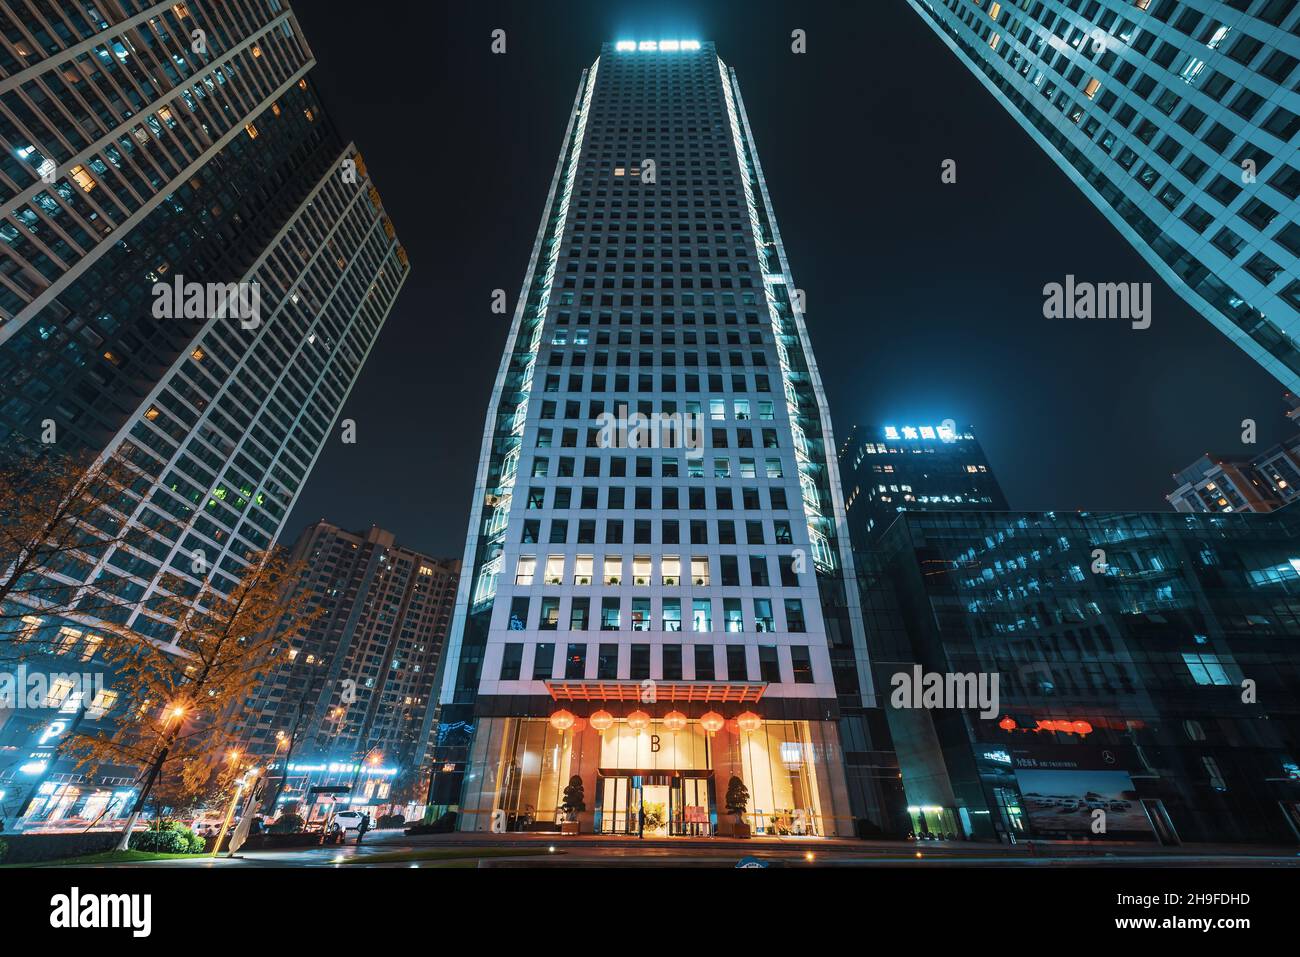 Modern buildings and skyscrapers illuminated at night Stock Photo